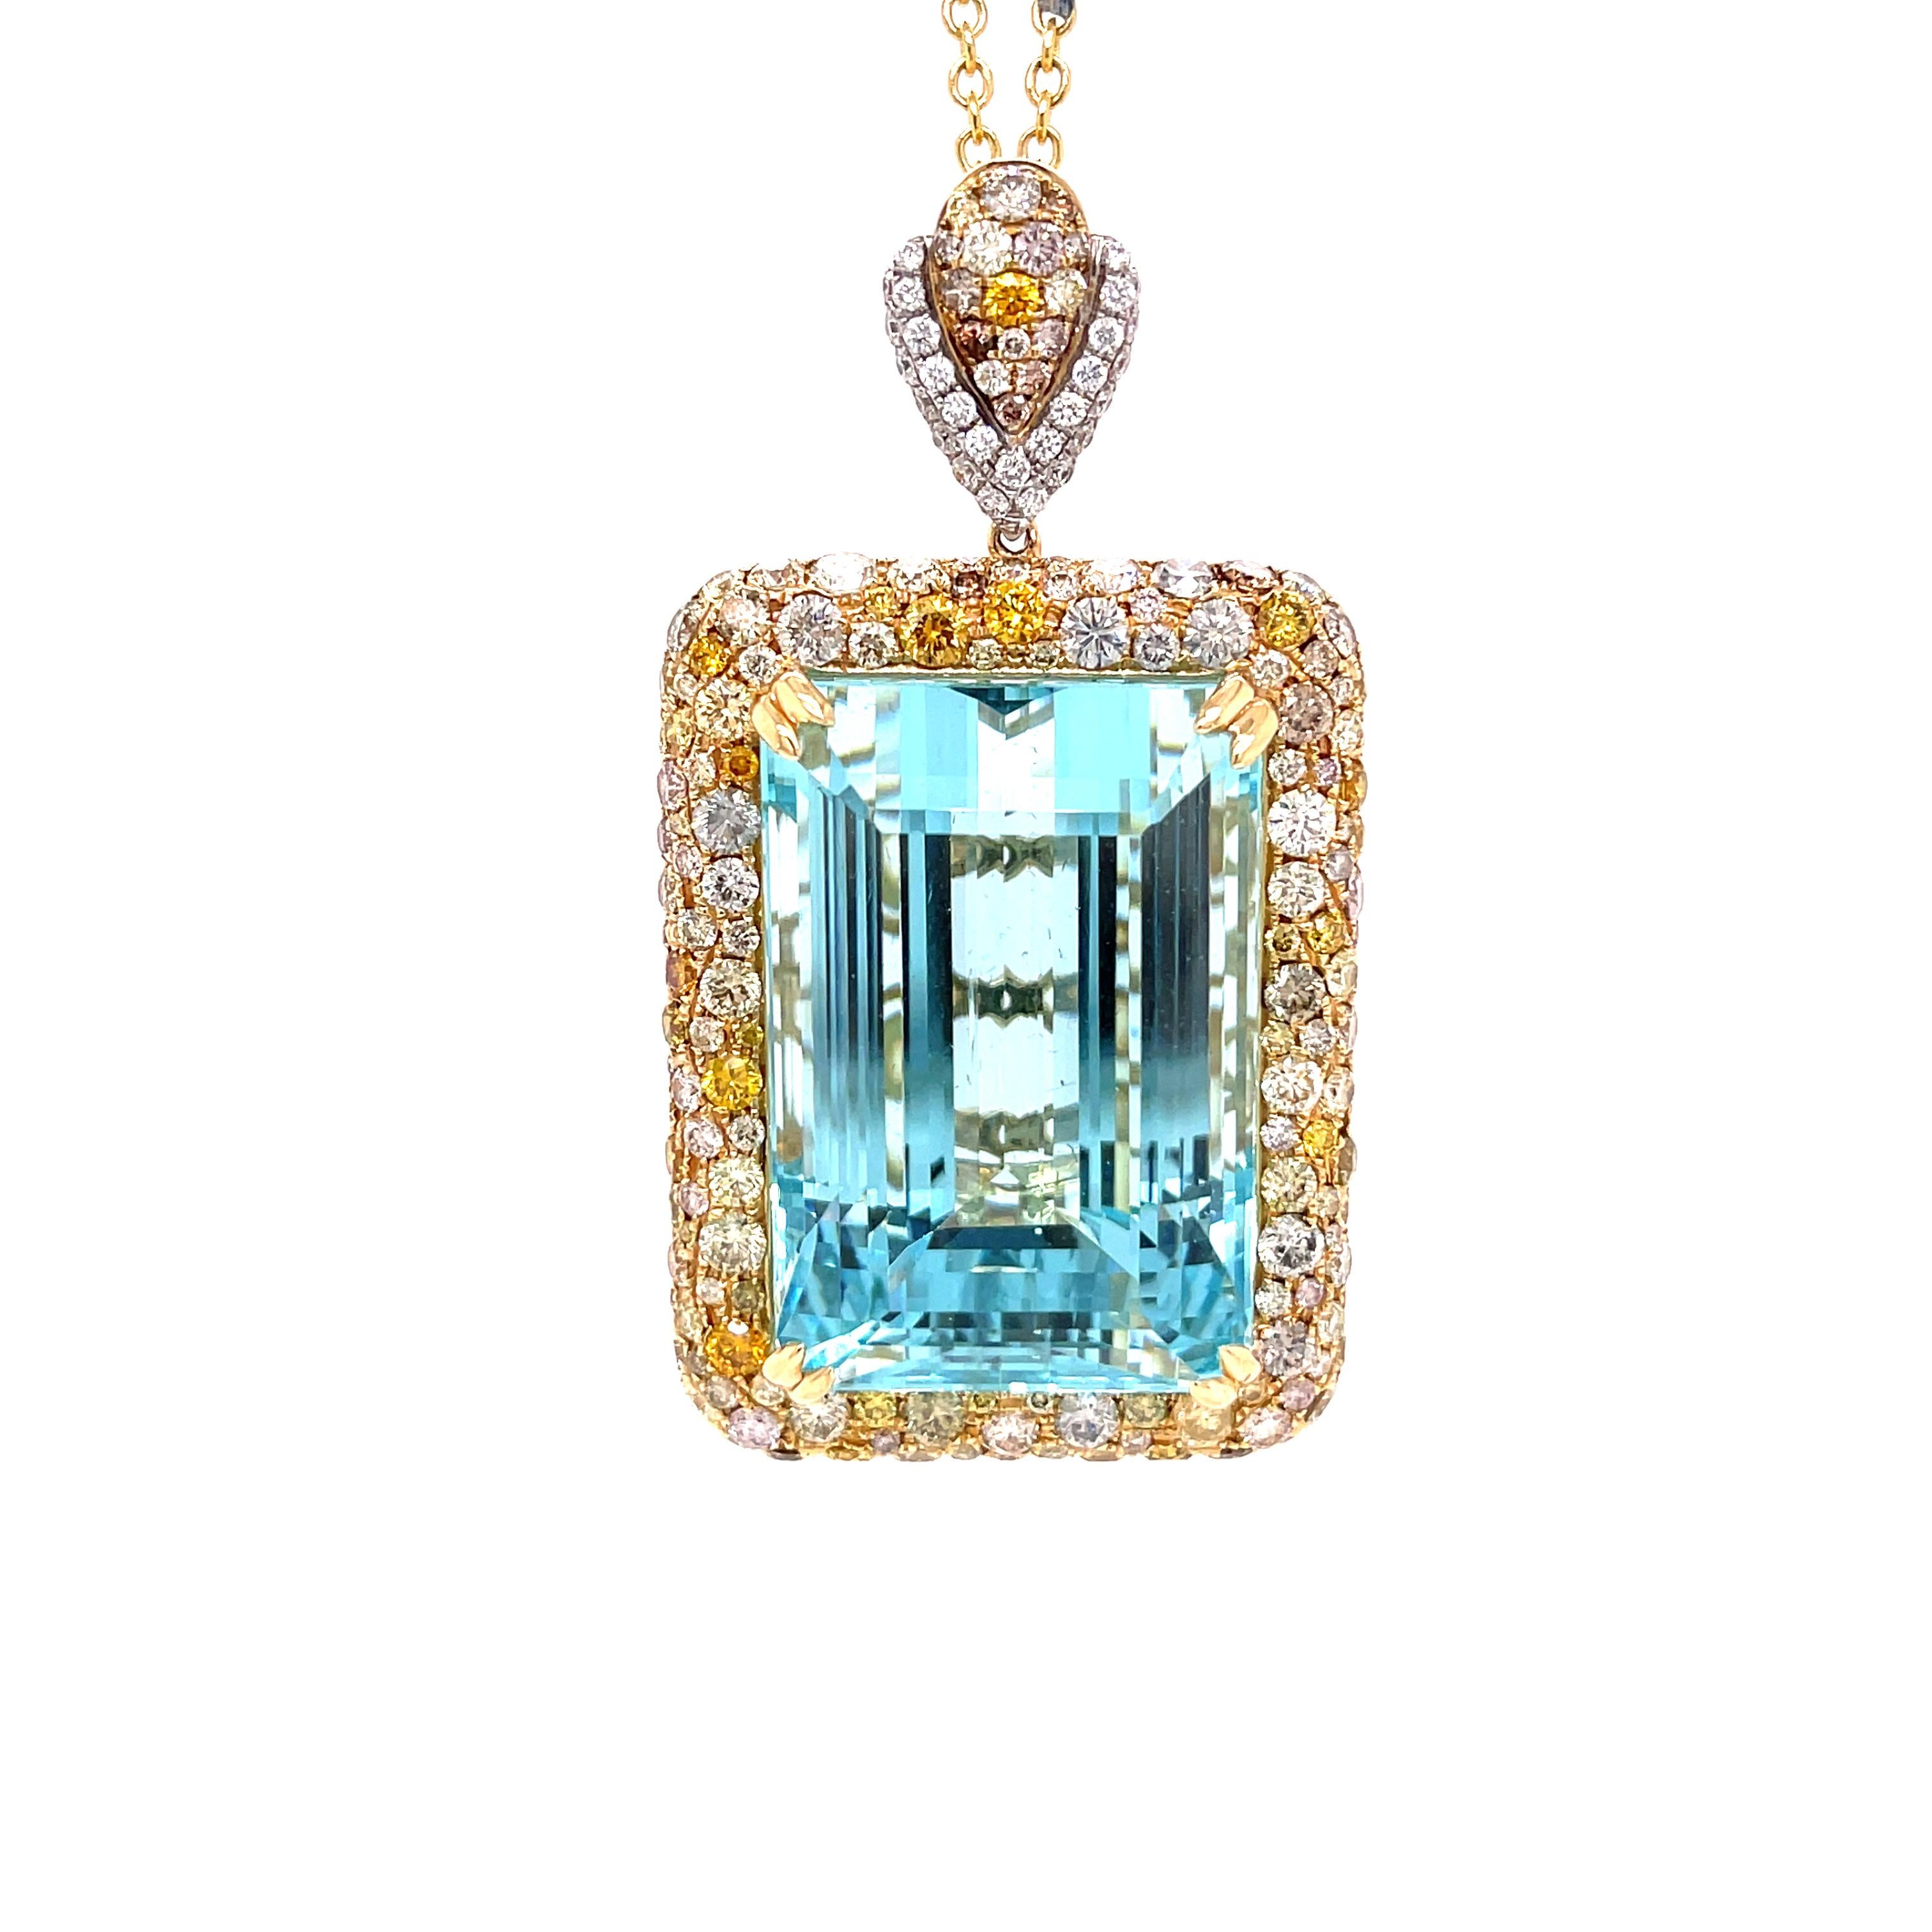 112.36 Carat Emerald Cut Aquamarine & Diamond Pendant w/ Chain in 14KT In New Condition For Sale In New York, NY